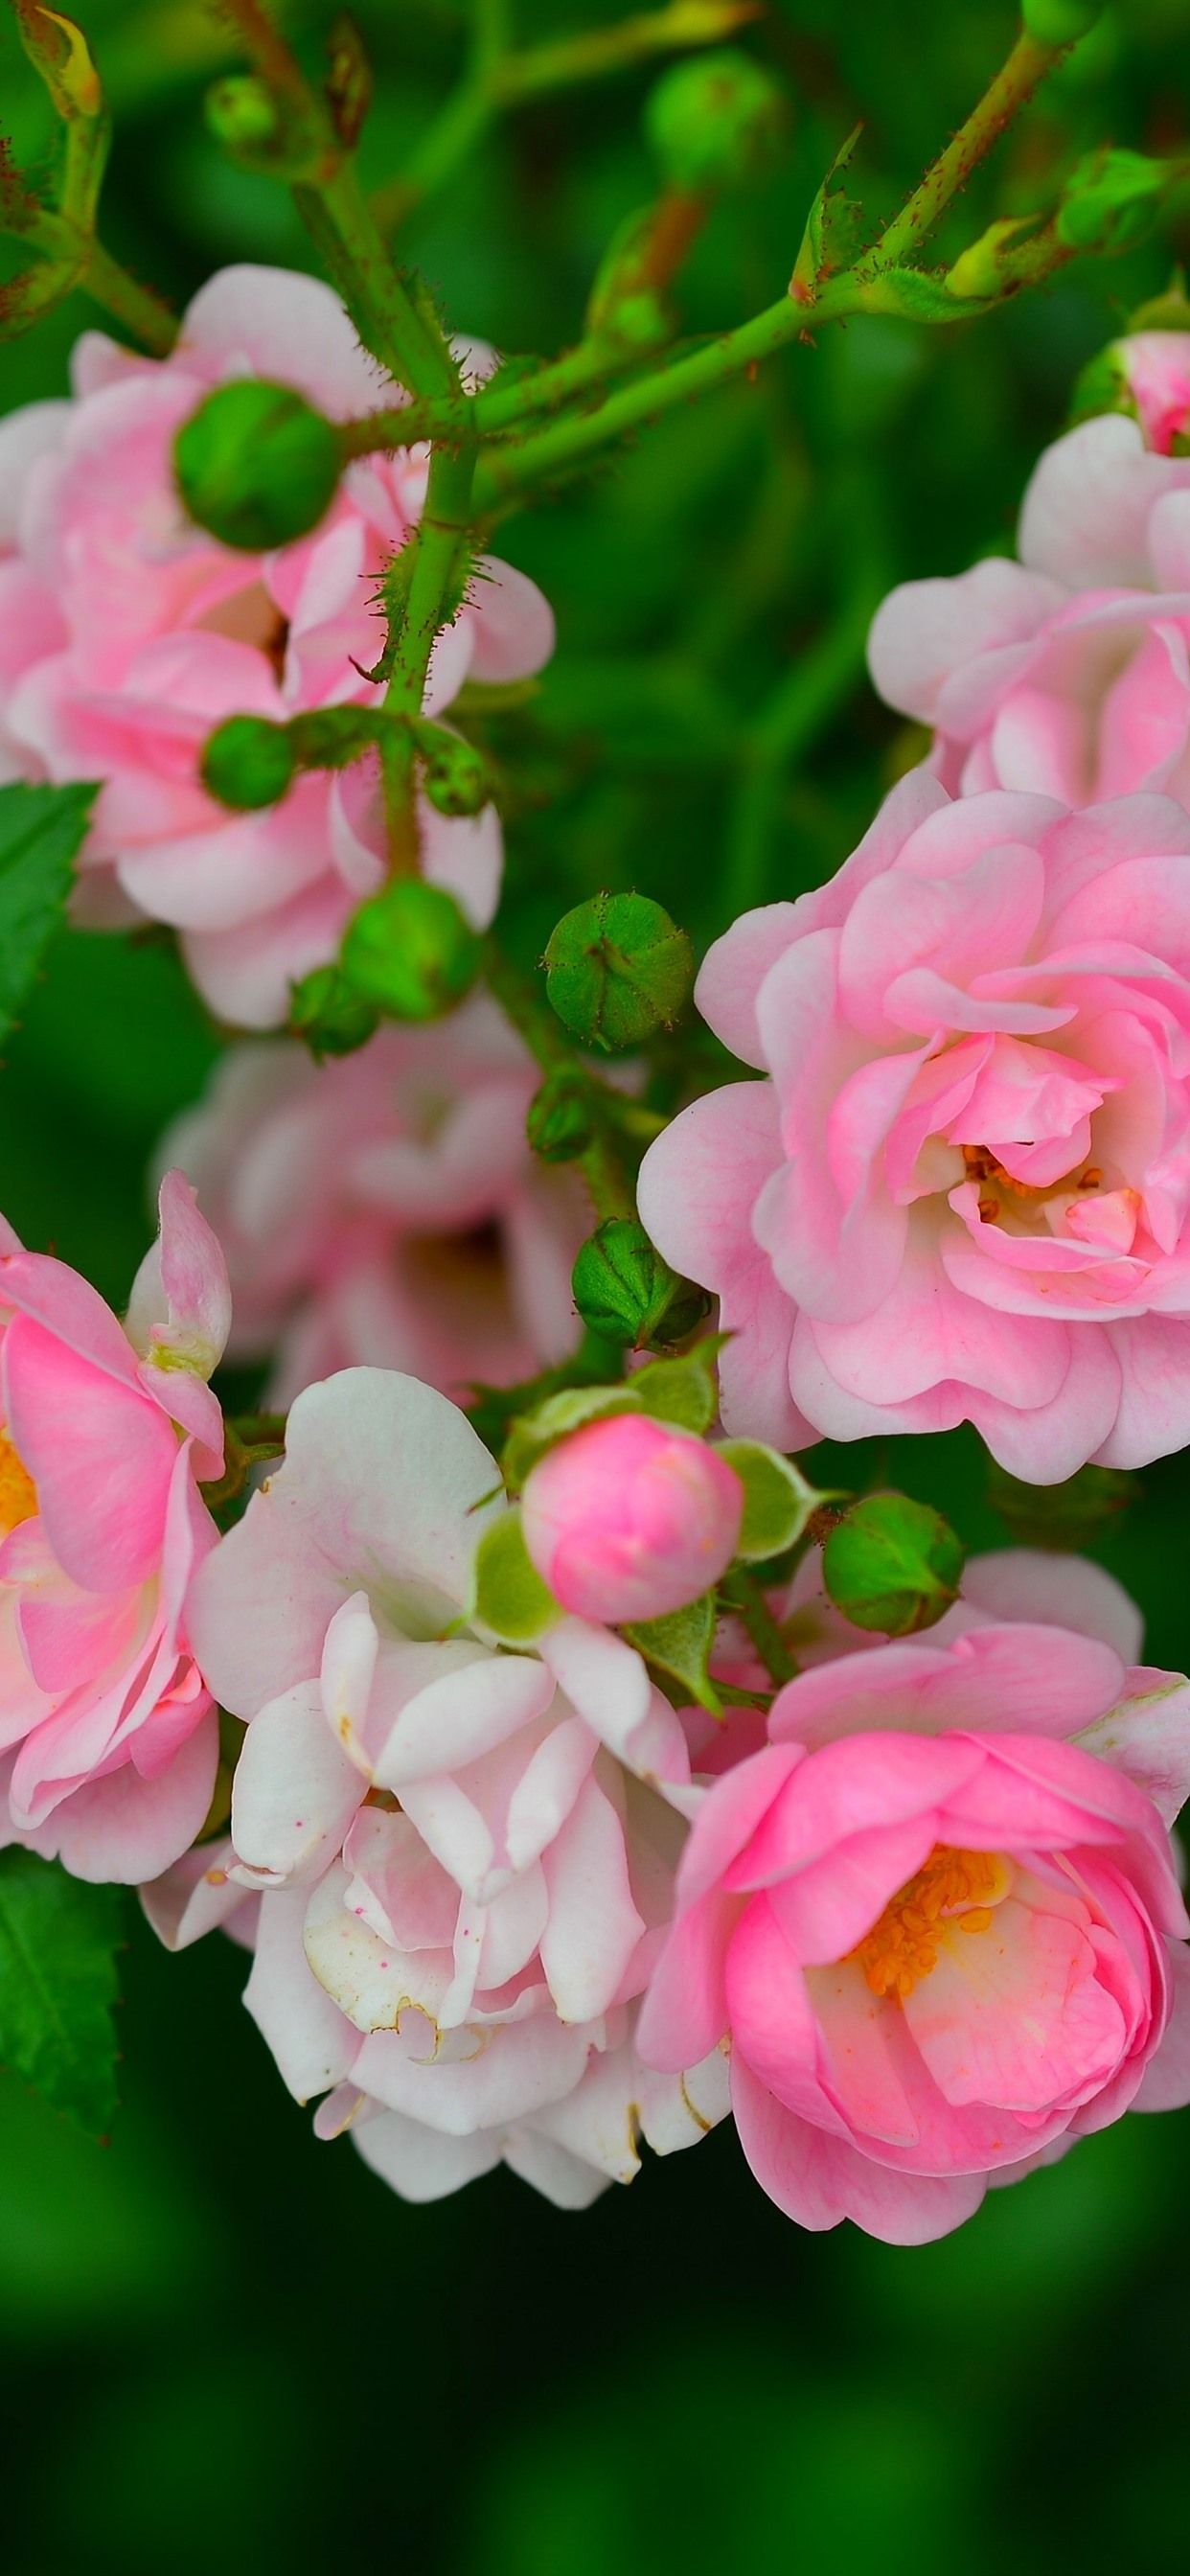 Some Pink Roses, Green Leaves, Spring 1242x2688 IPhone 11 Pro XS Max Wallpaper, Background, Picture, Image